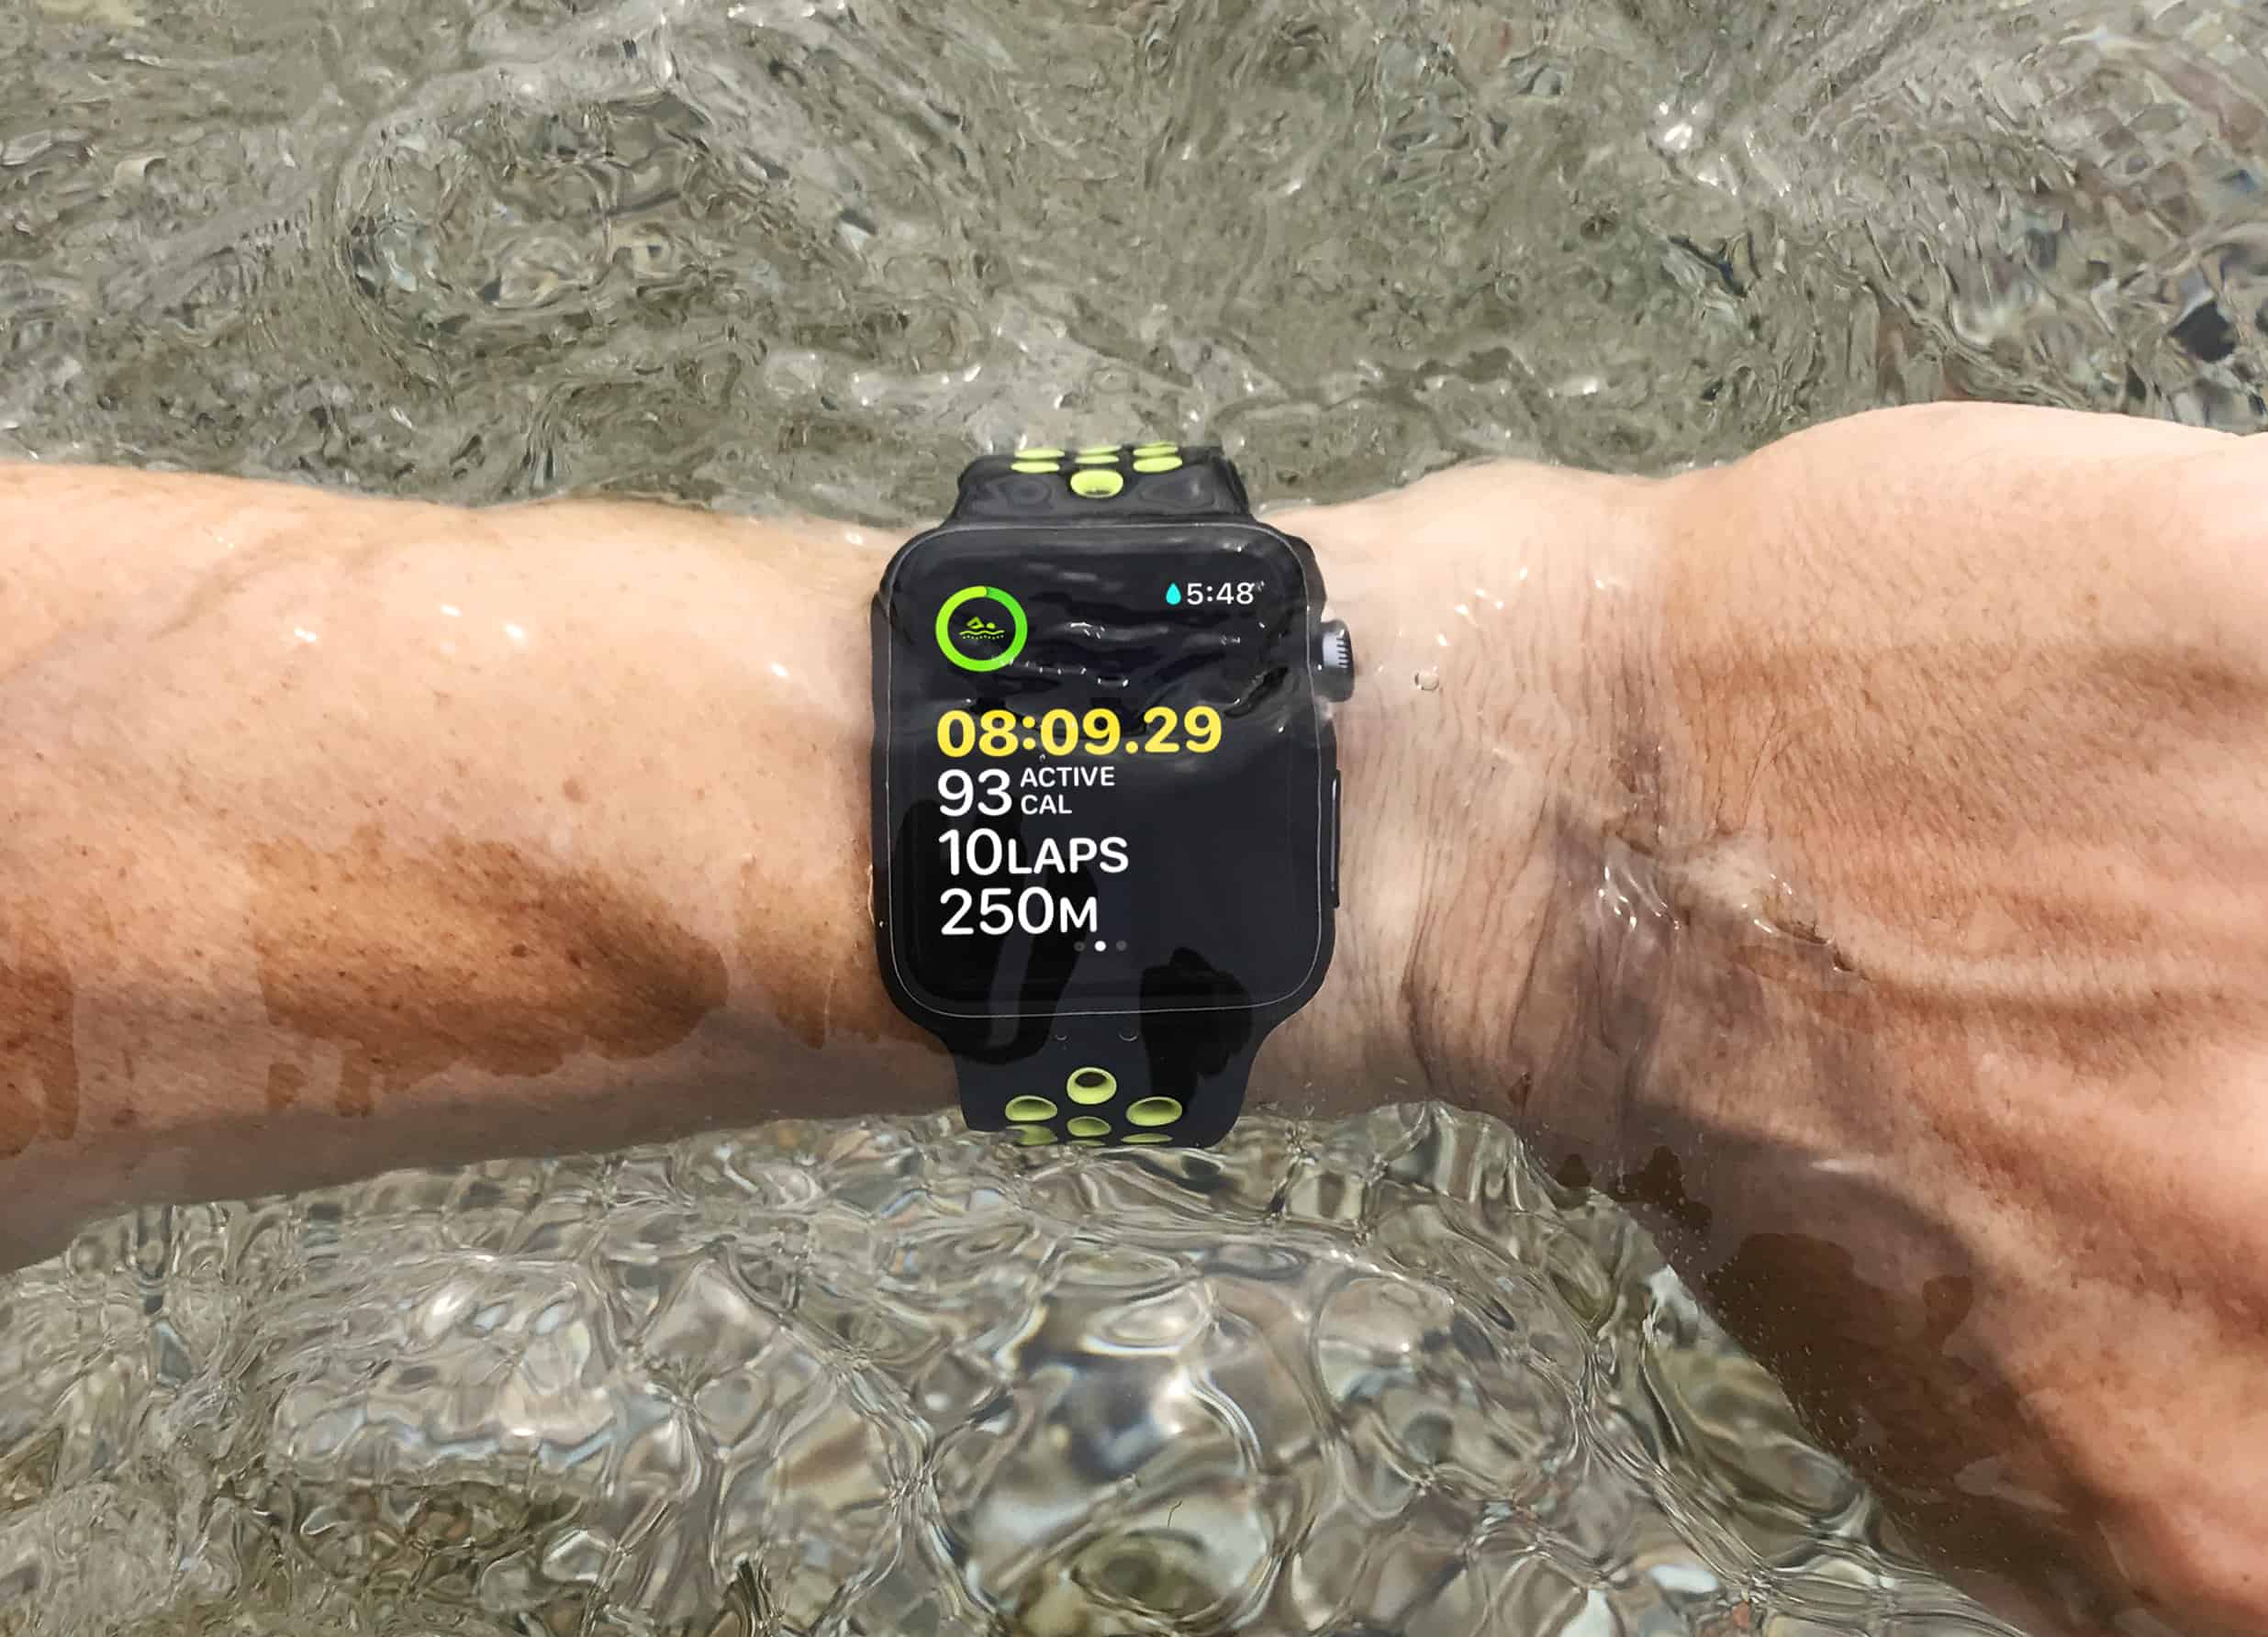 The Apple Watch touchscreen is disabled in waterproof mode, so how do you finish your workout?